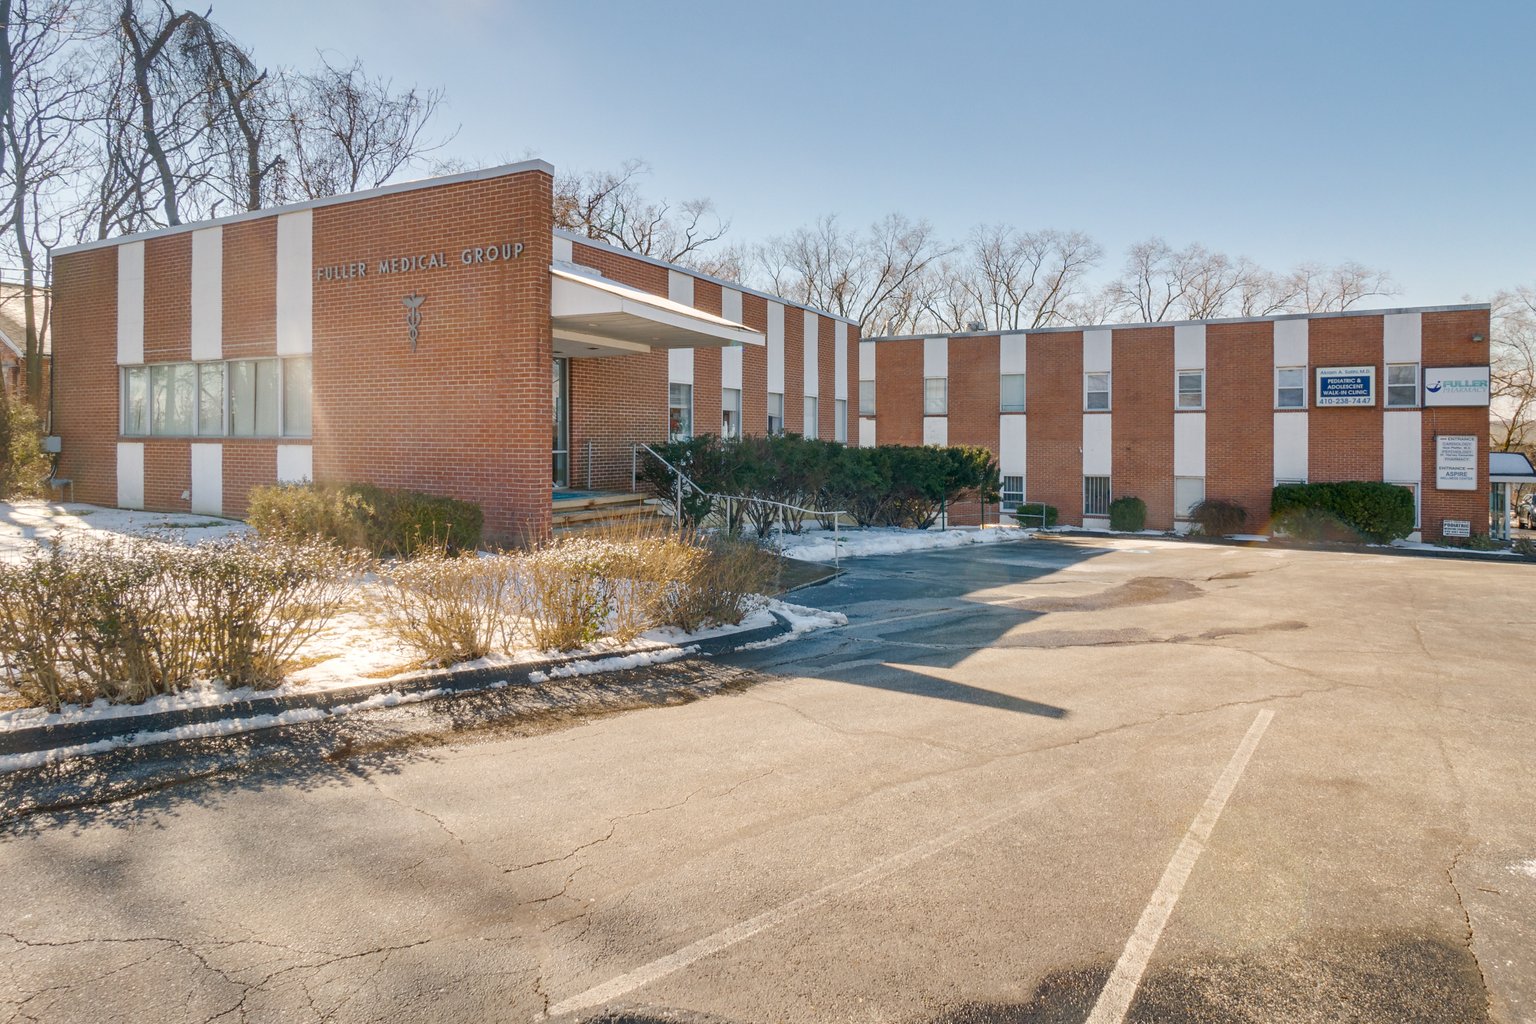 6918 Ridge Rd: 10,990 Sq. Ft. Medical Office Building Next to Franklin Square Hospital, 100% Occupancy